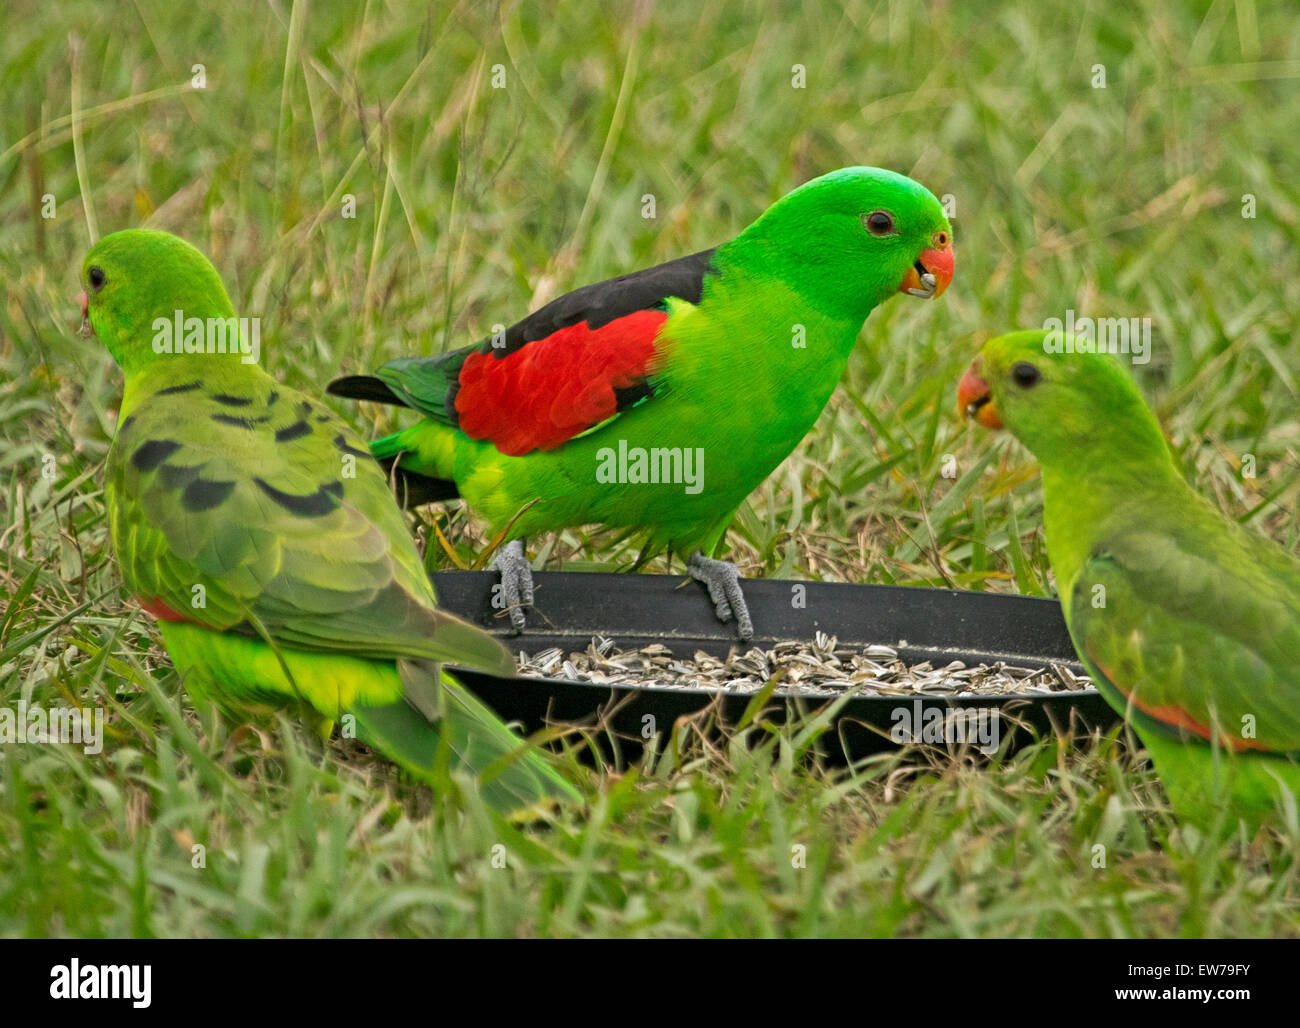 Spectacular male and female red-winged parrots Aprosmictus ...